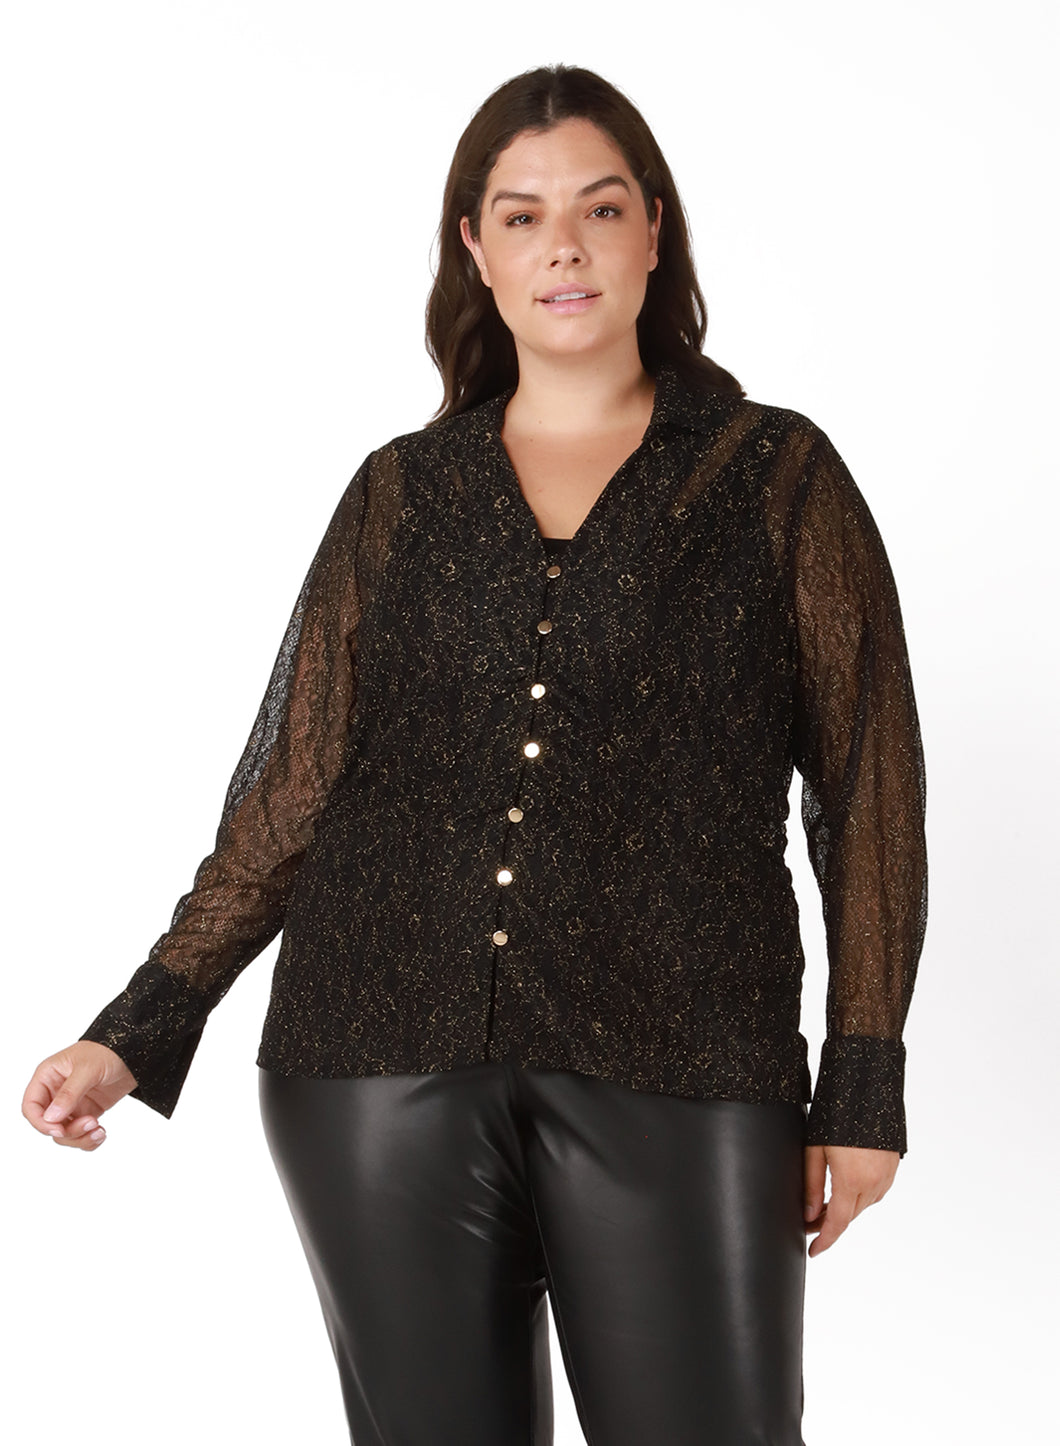 SHEER LACE BLOUSE by Dex